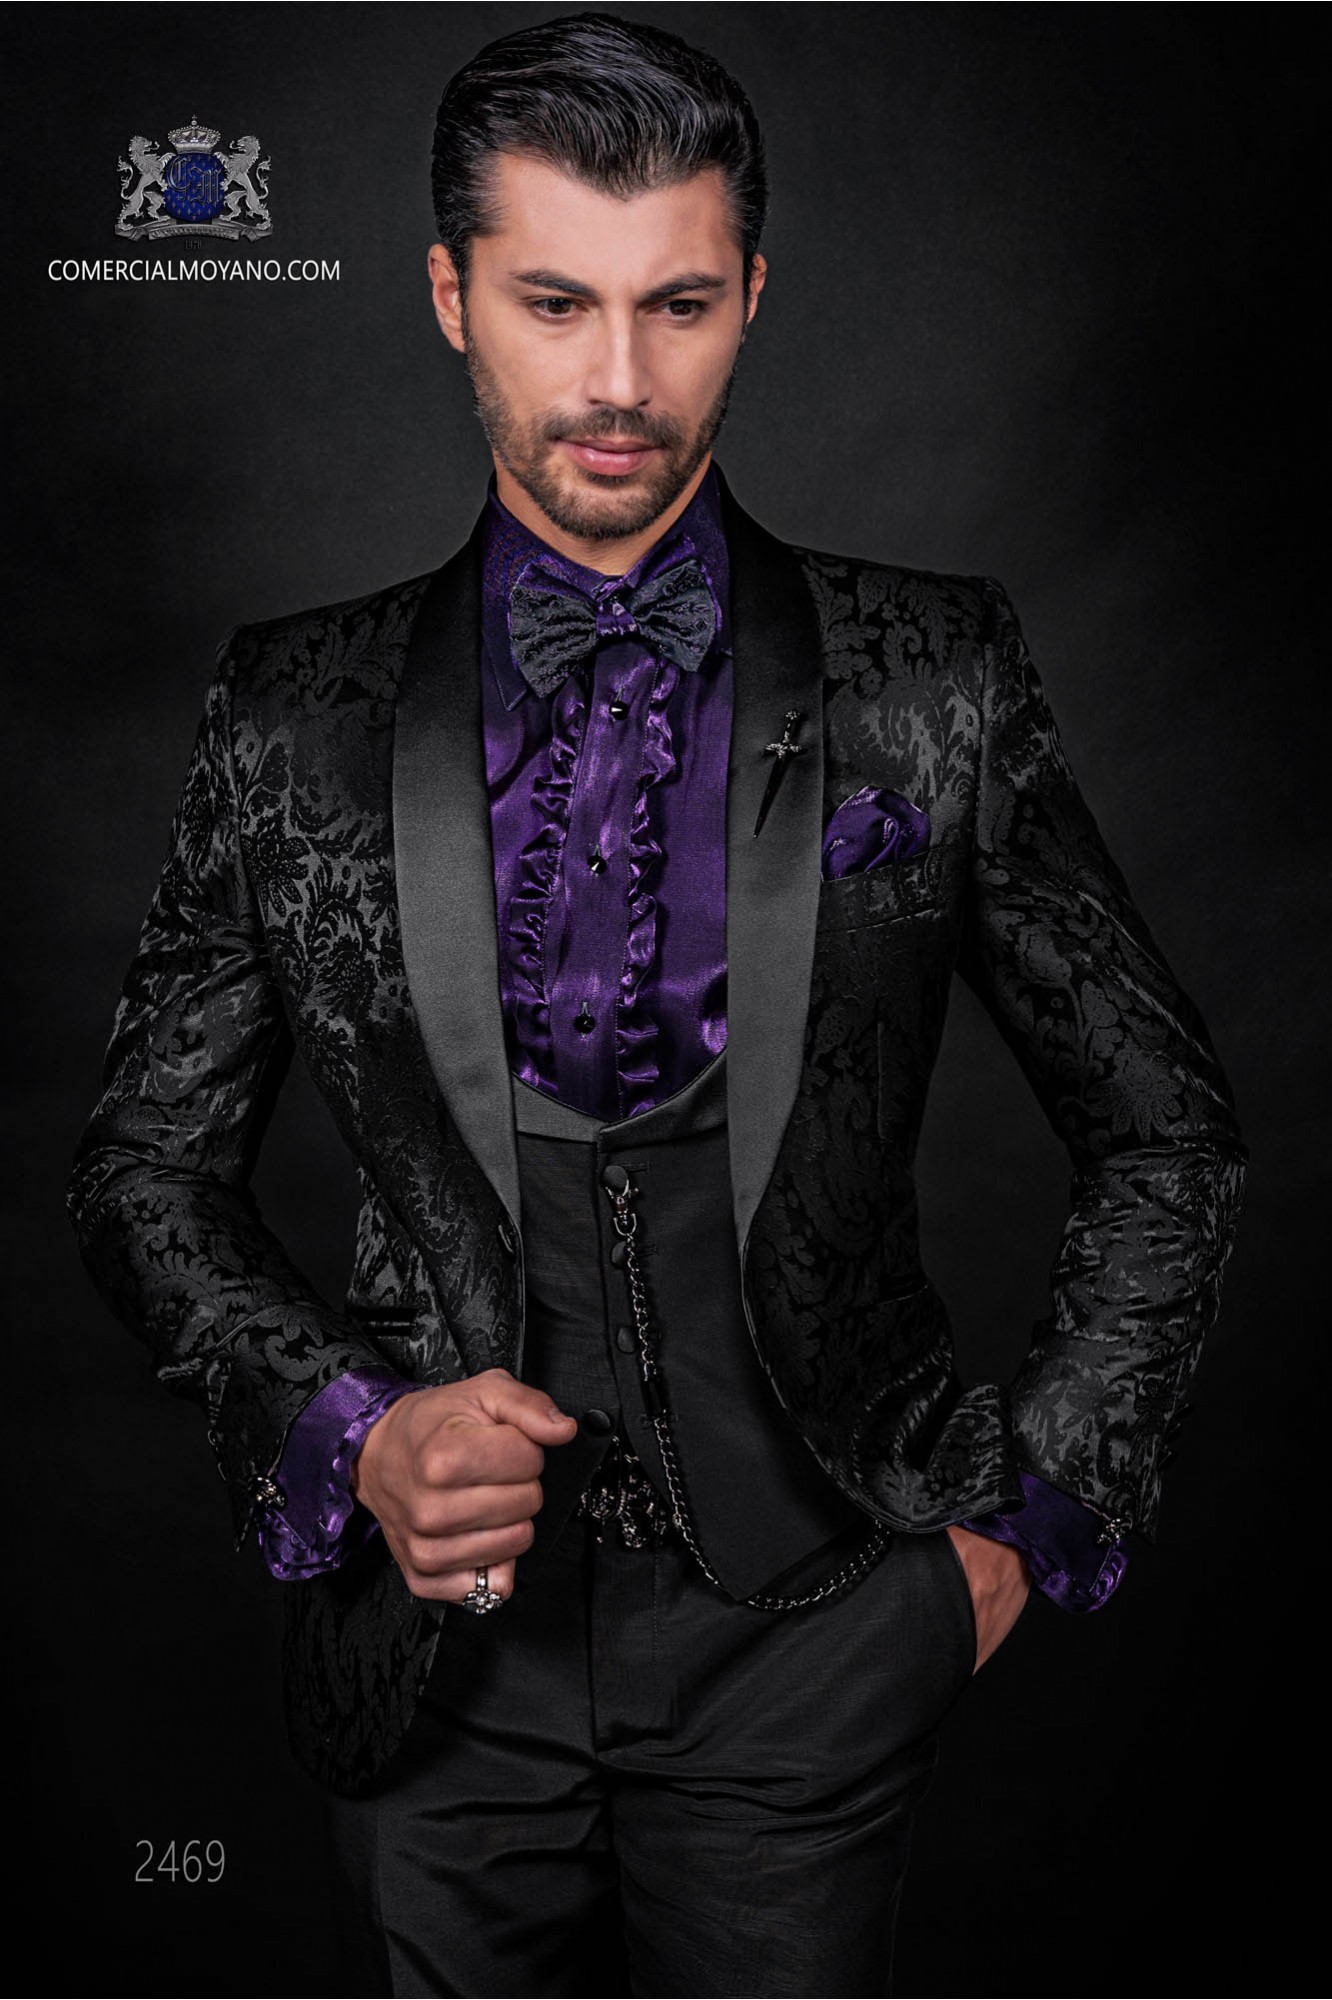 Bespoke black silk dinner jacket combined with a black trousers